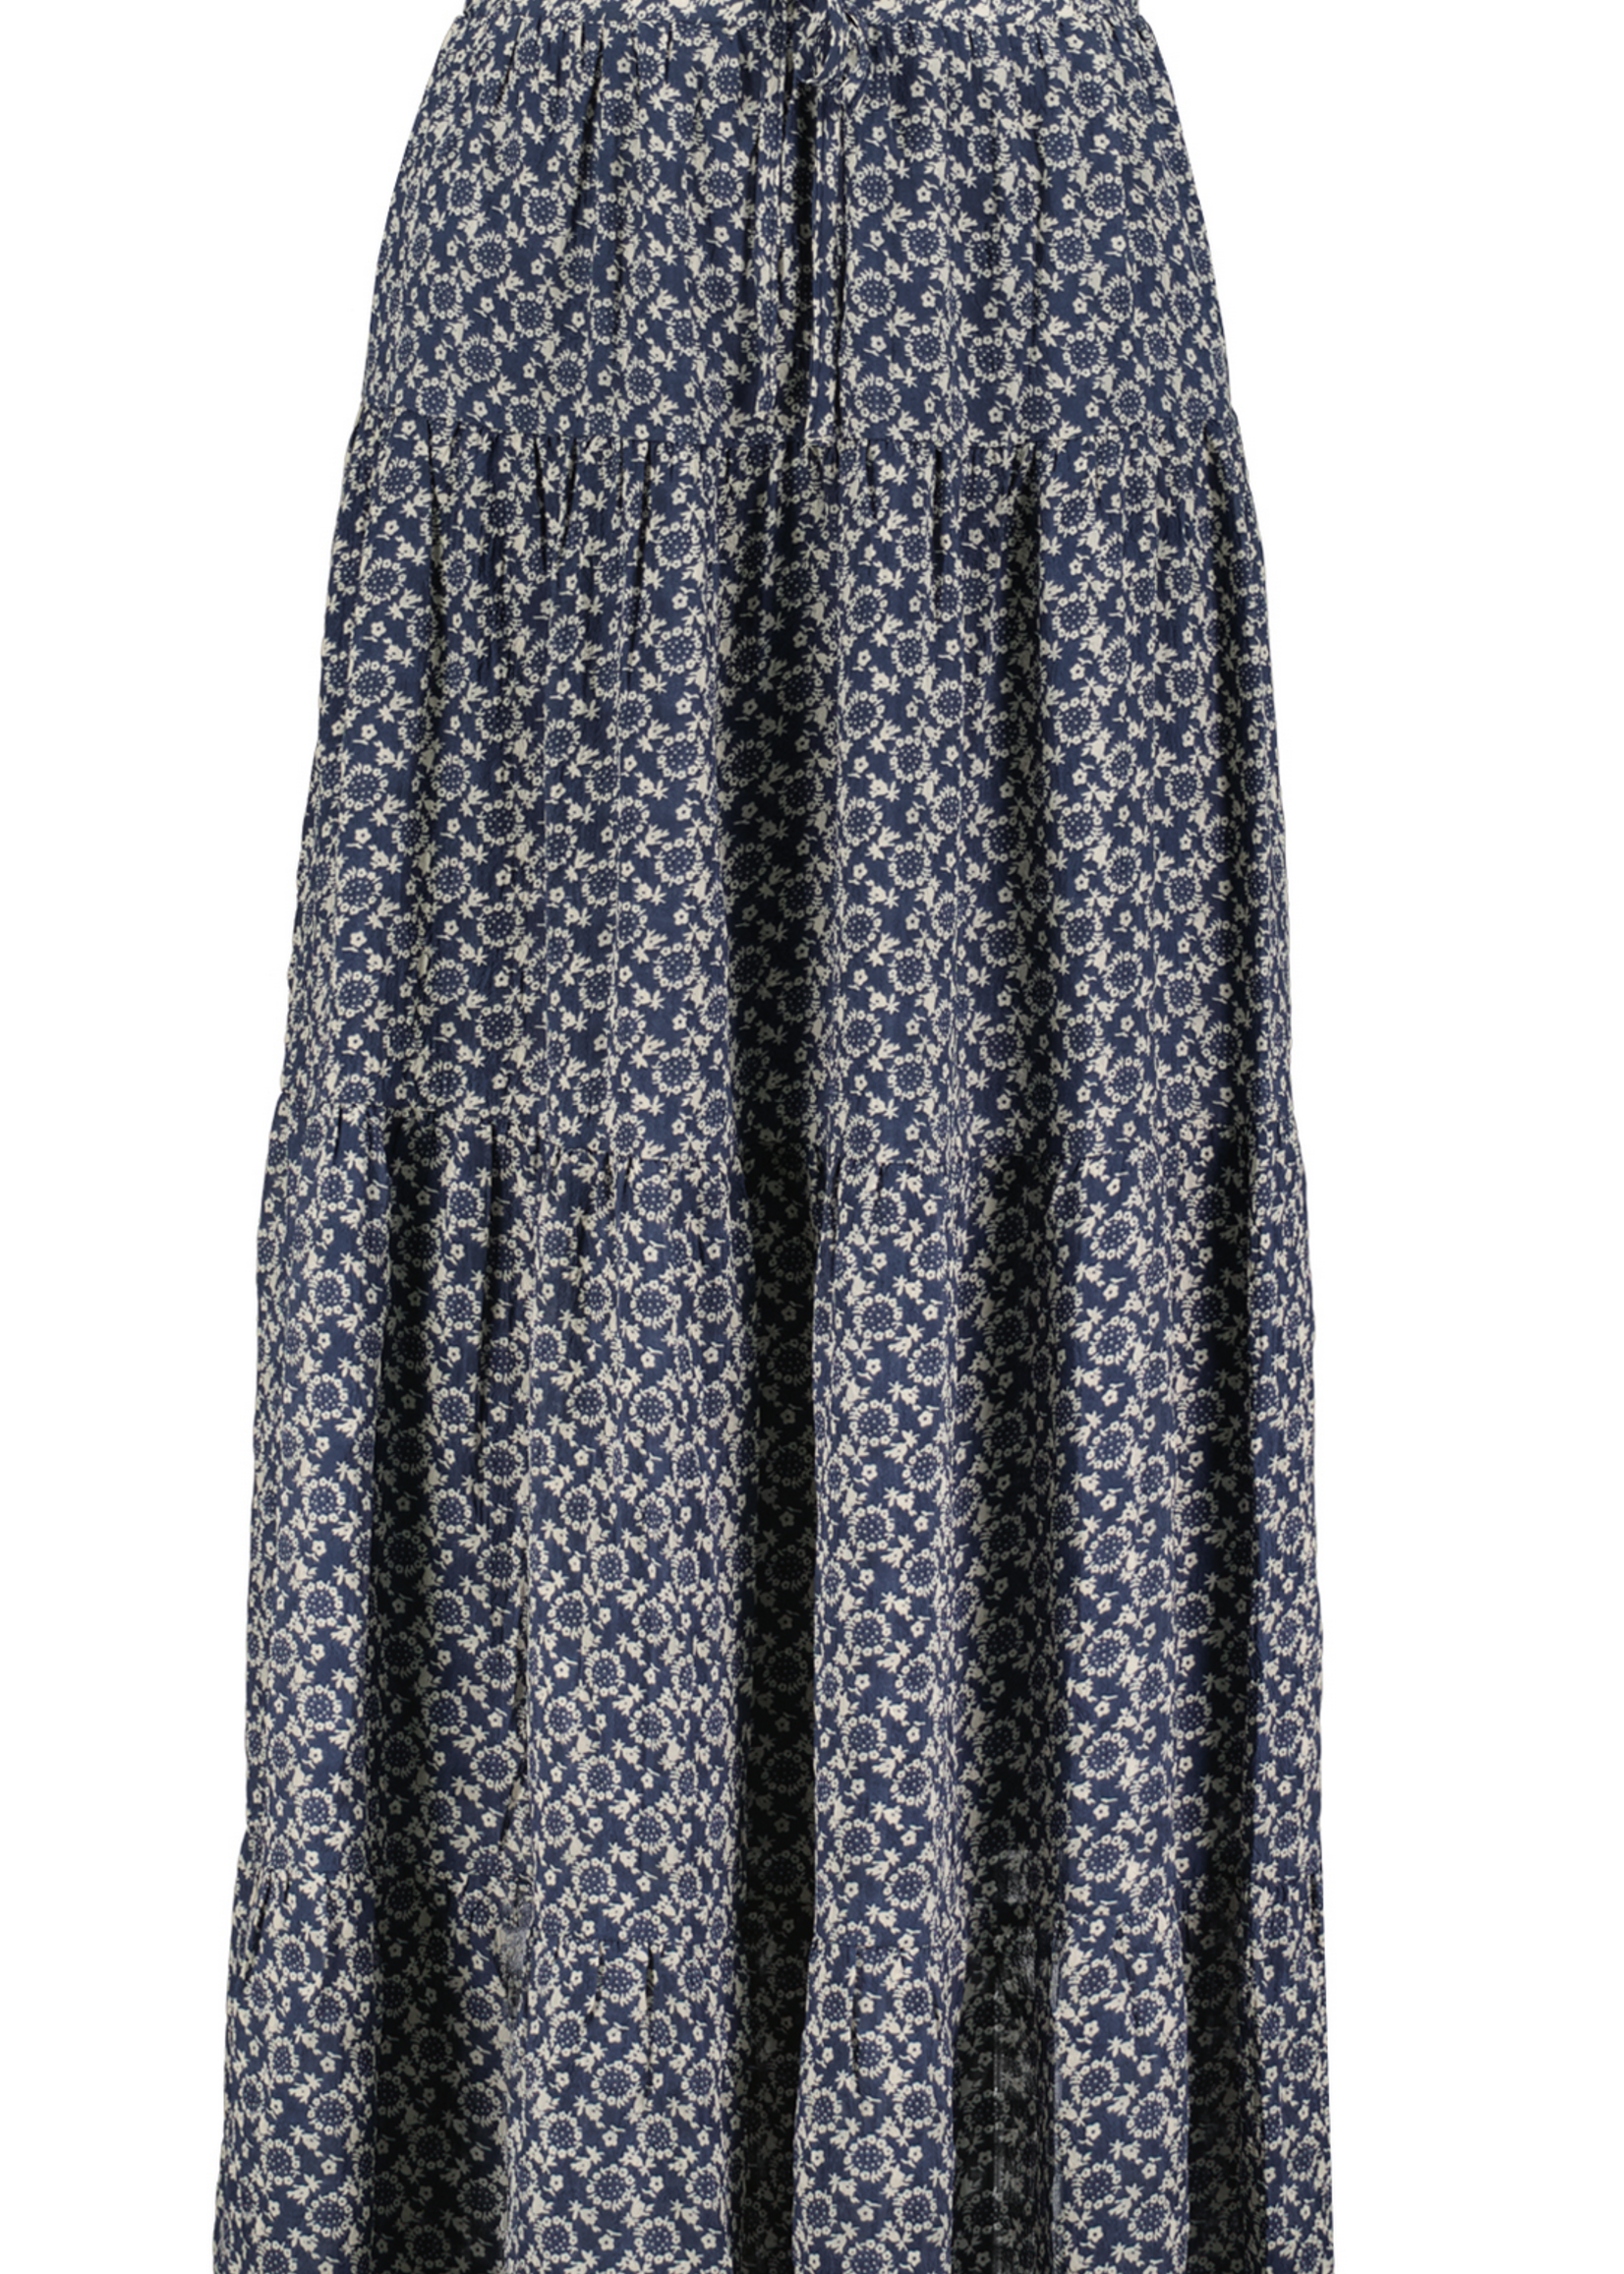 BISHOP+YOUNG FESTIVAL SKIRT